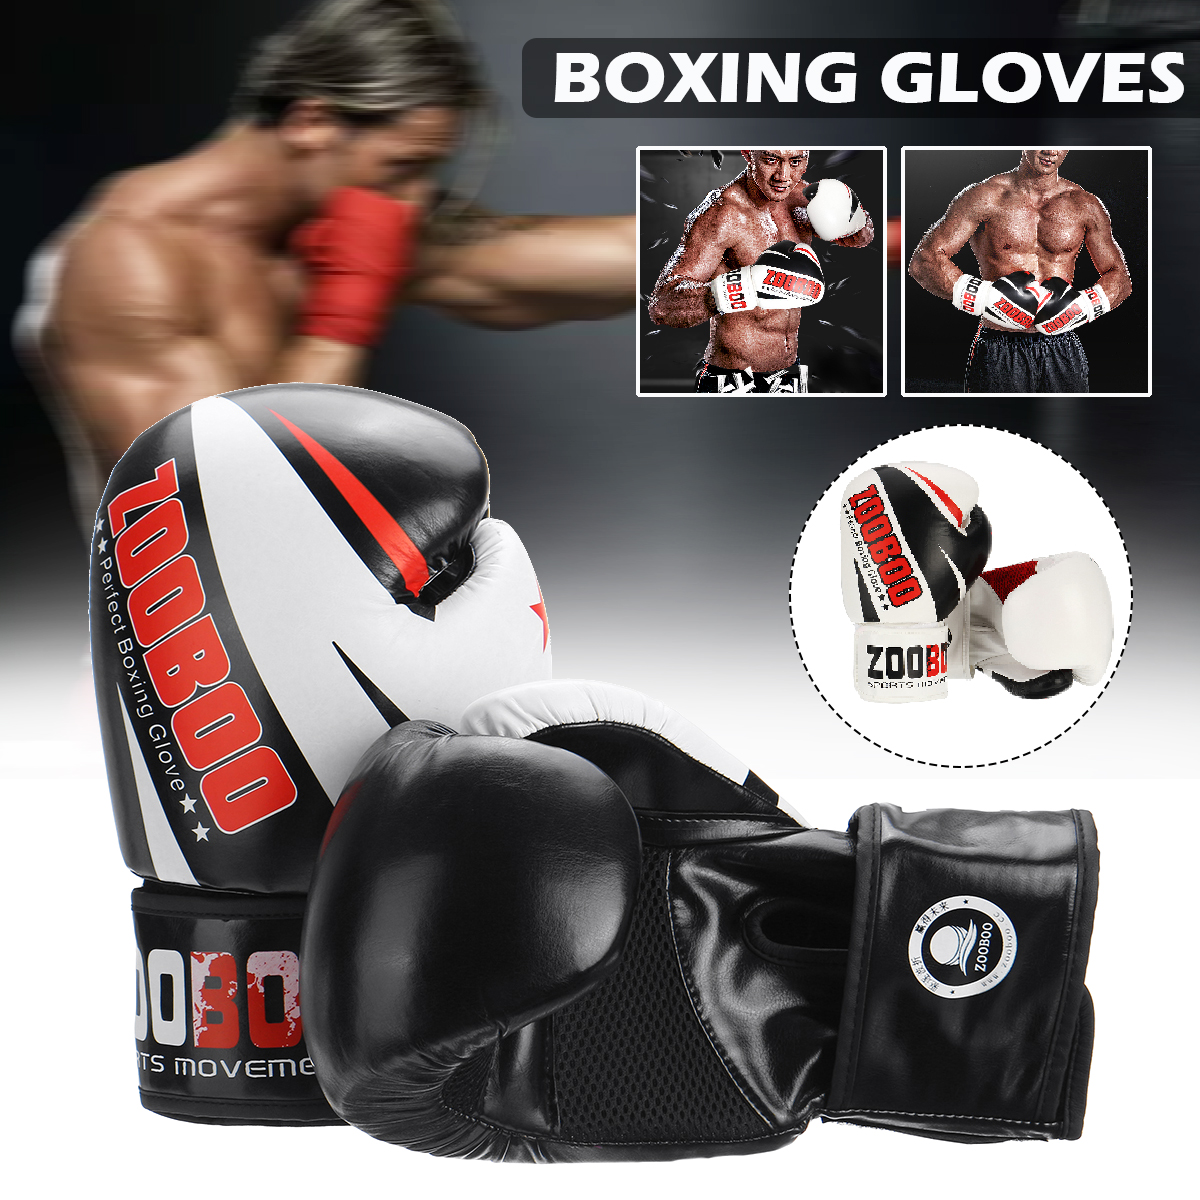 1-Pair-Adult-Boxing-Gloves-Professional-Mesh-Breathable-PU-Leather-Gloves-Sanda-Boxing-Training-Acce-1676767-1